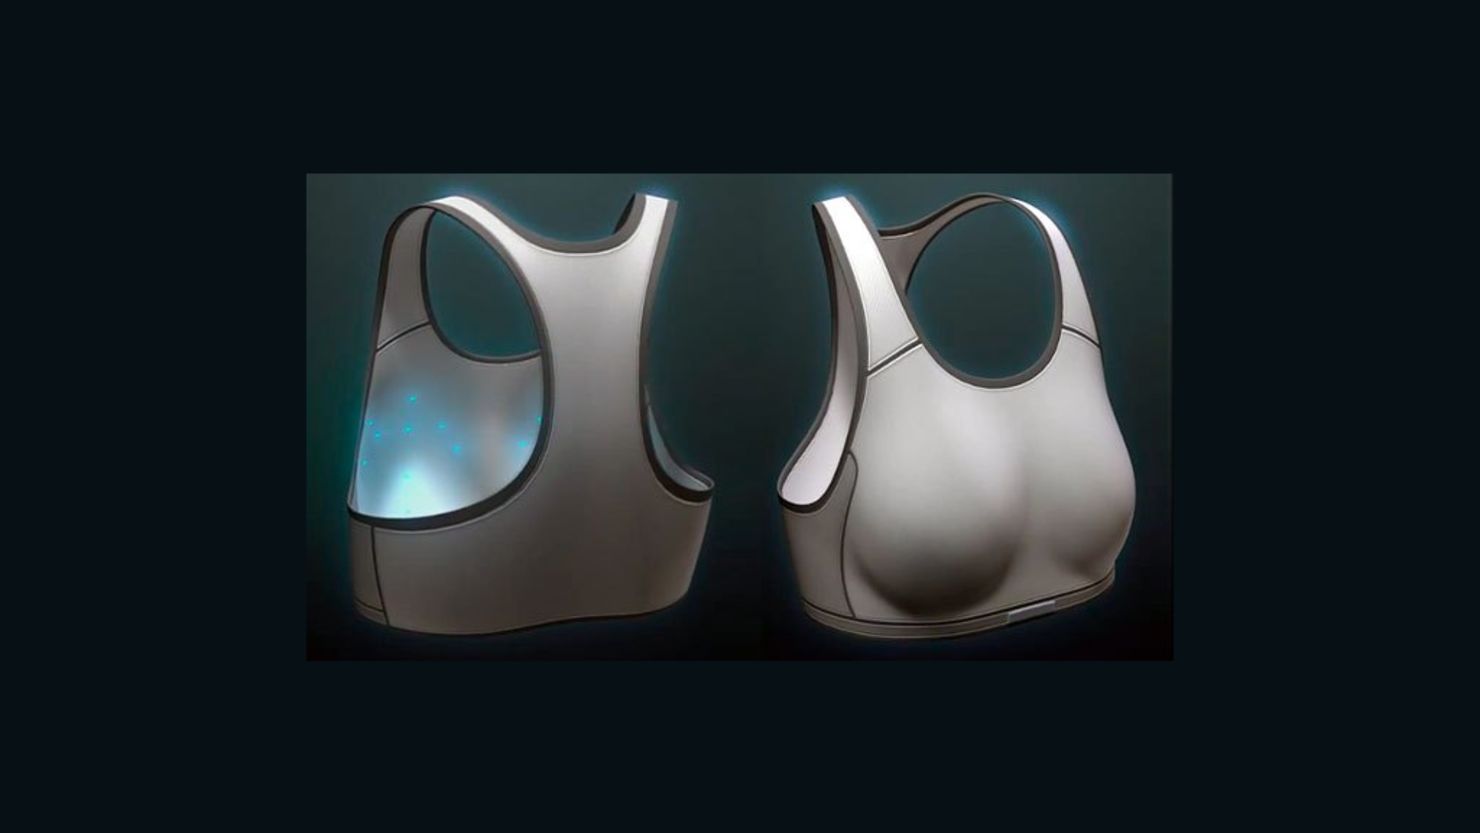 18 year old student creates bra that detects breast cancer - Eat Innovation